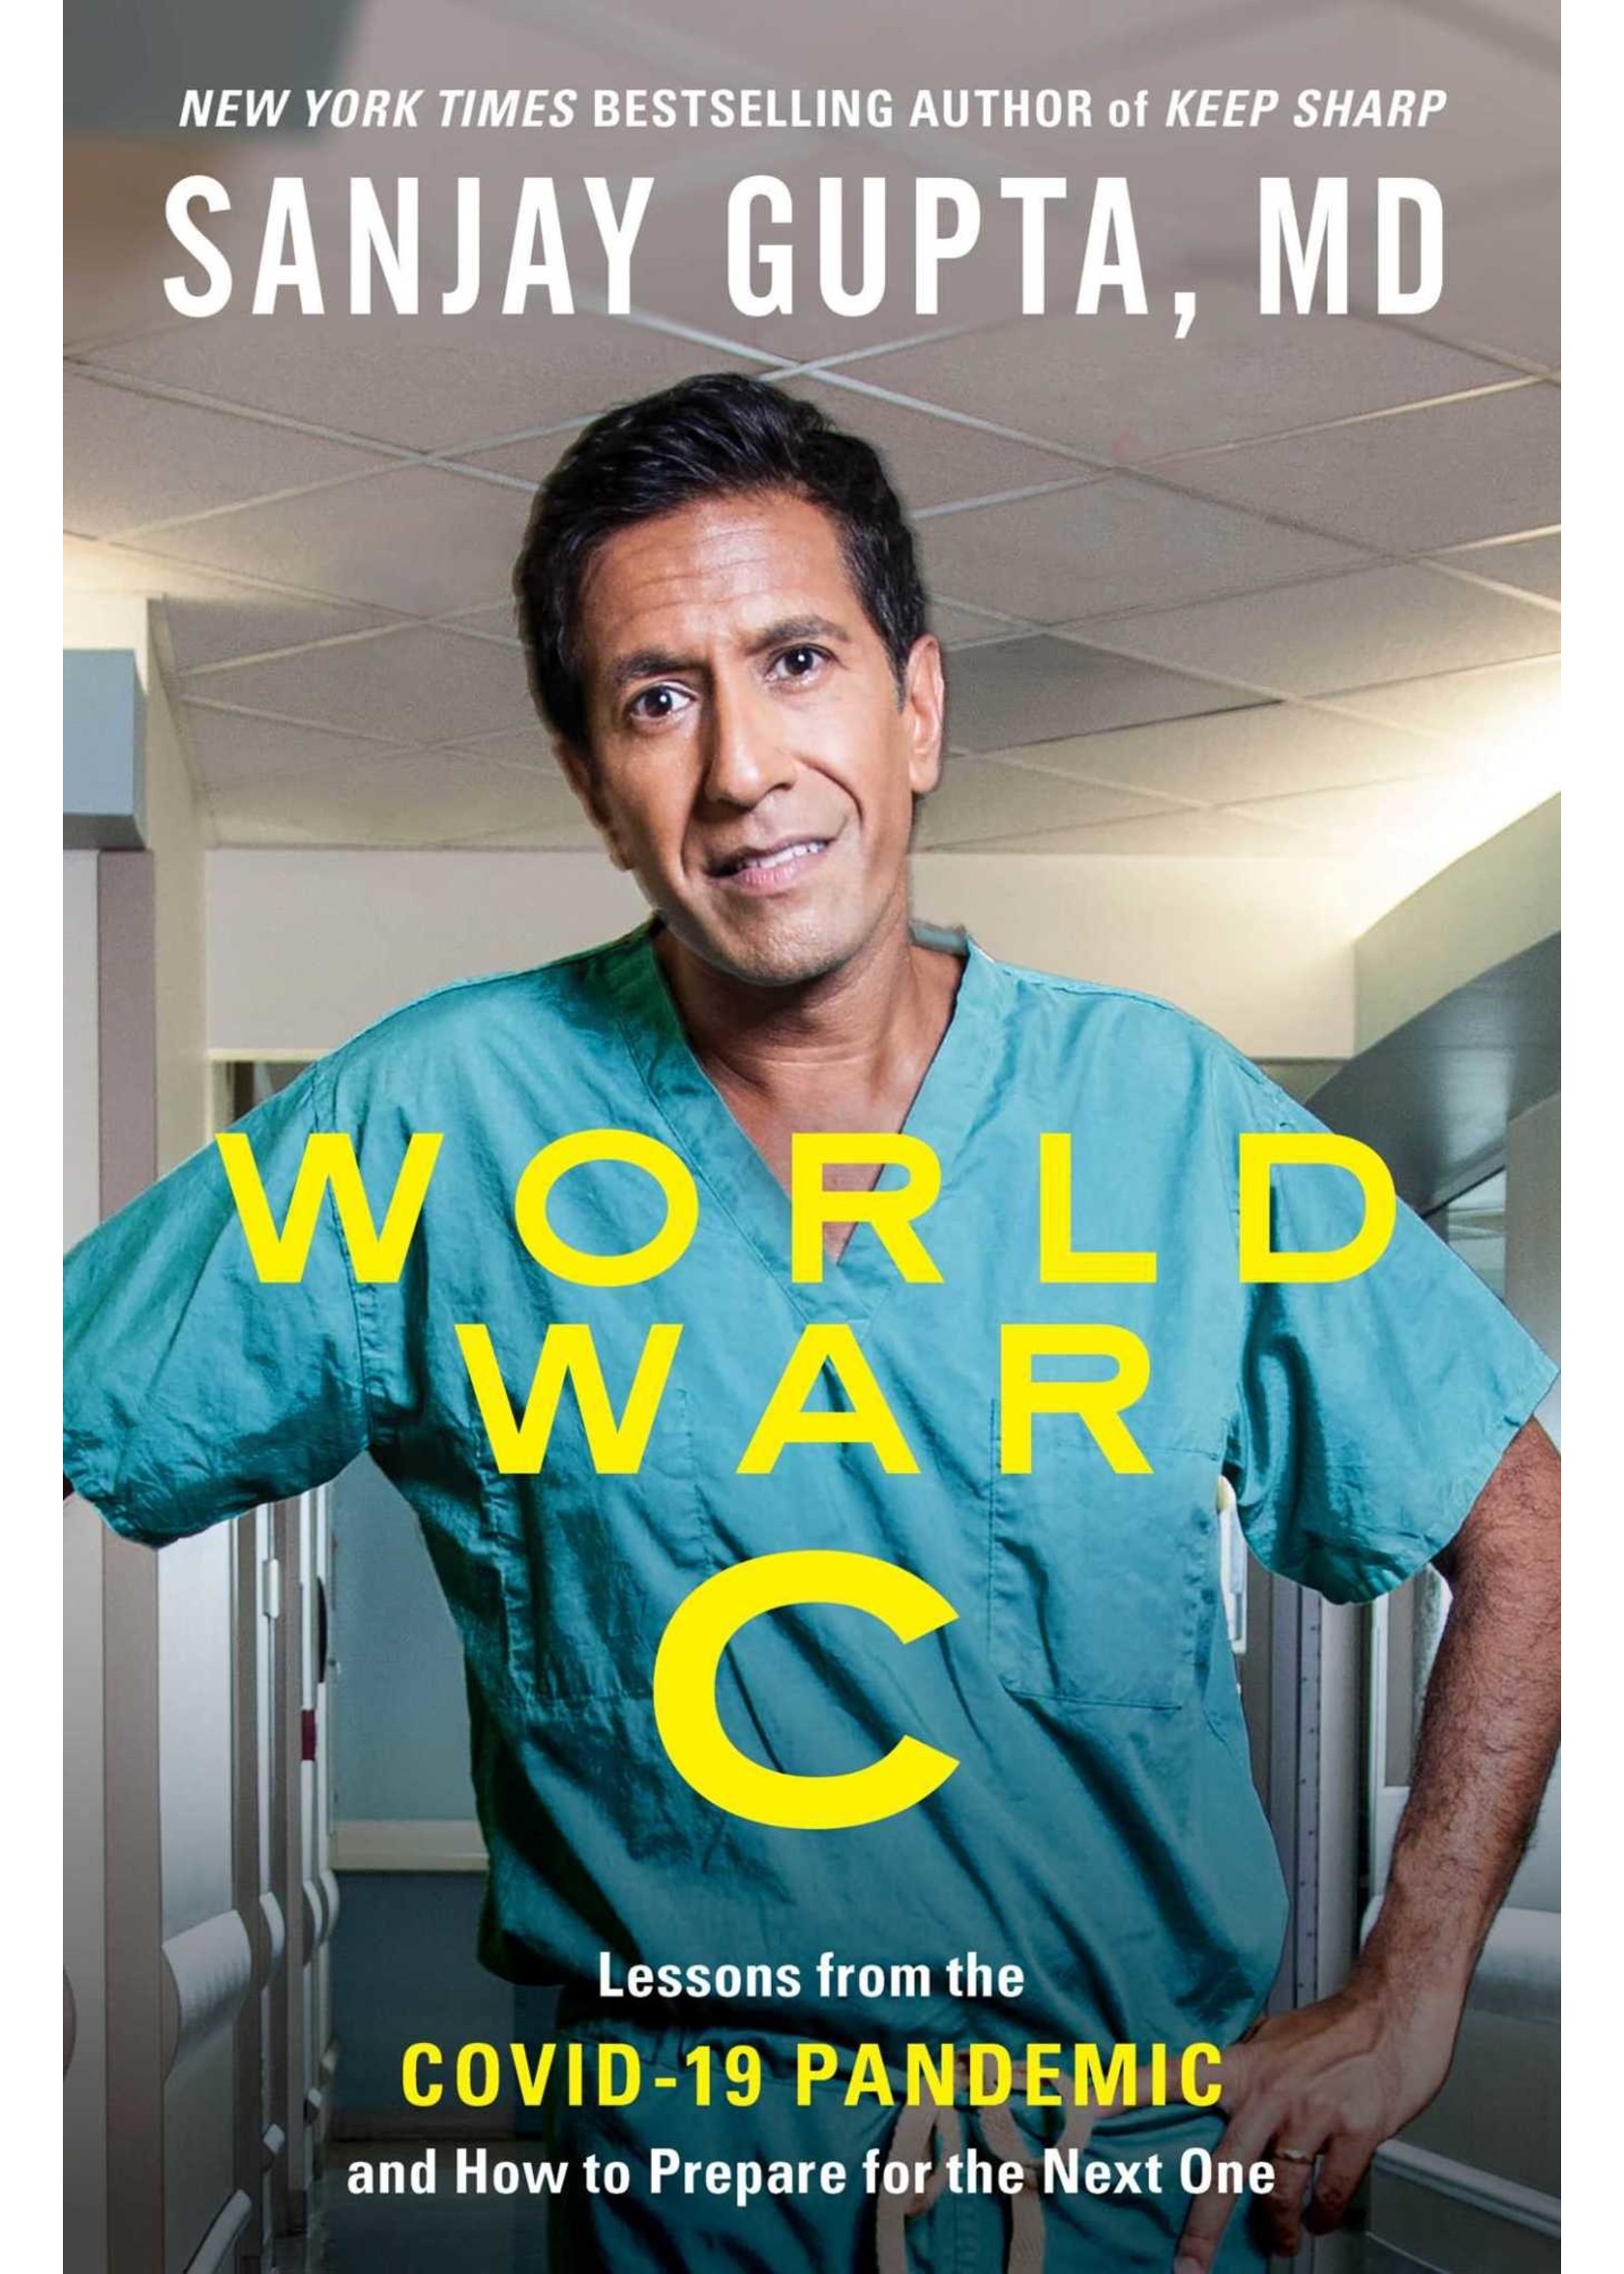 World War C: Lessons from the Covid-19 Pandemic and How to Prepare for the Next One by Sanjay Gupta